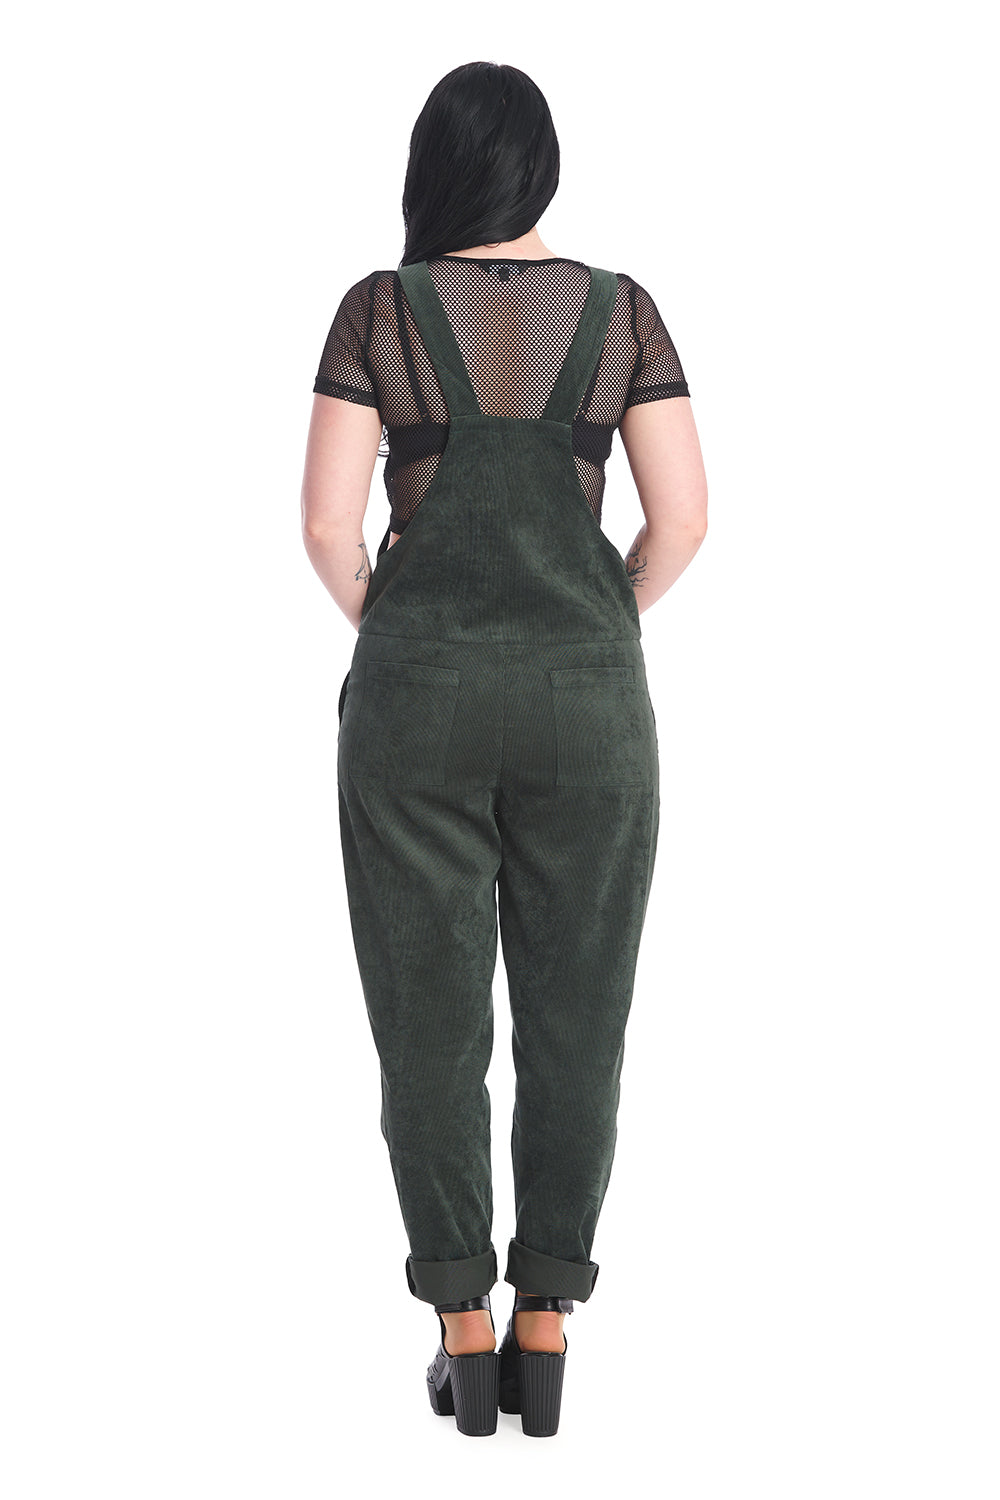 Gothic model in dark green dungarees with a black mesh top 